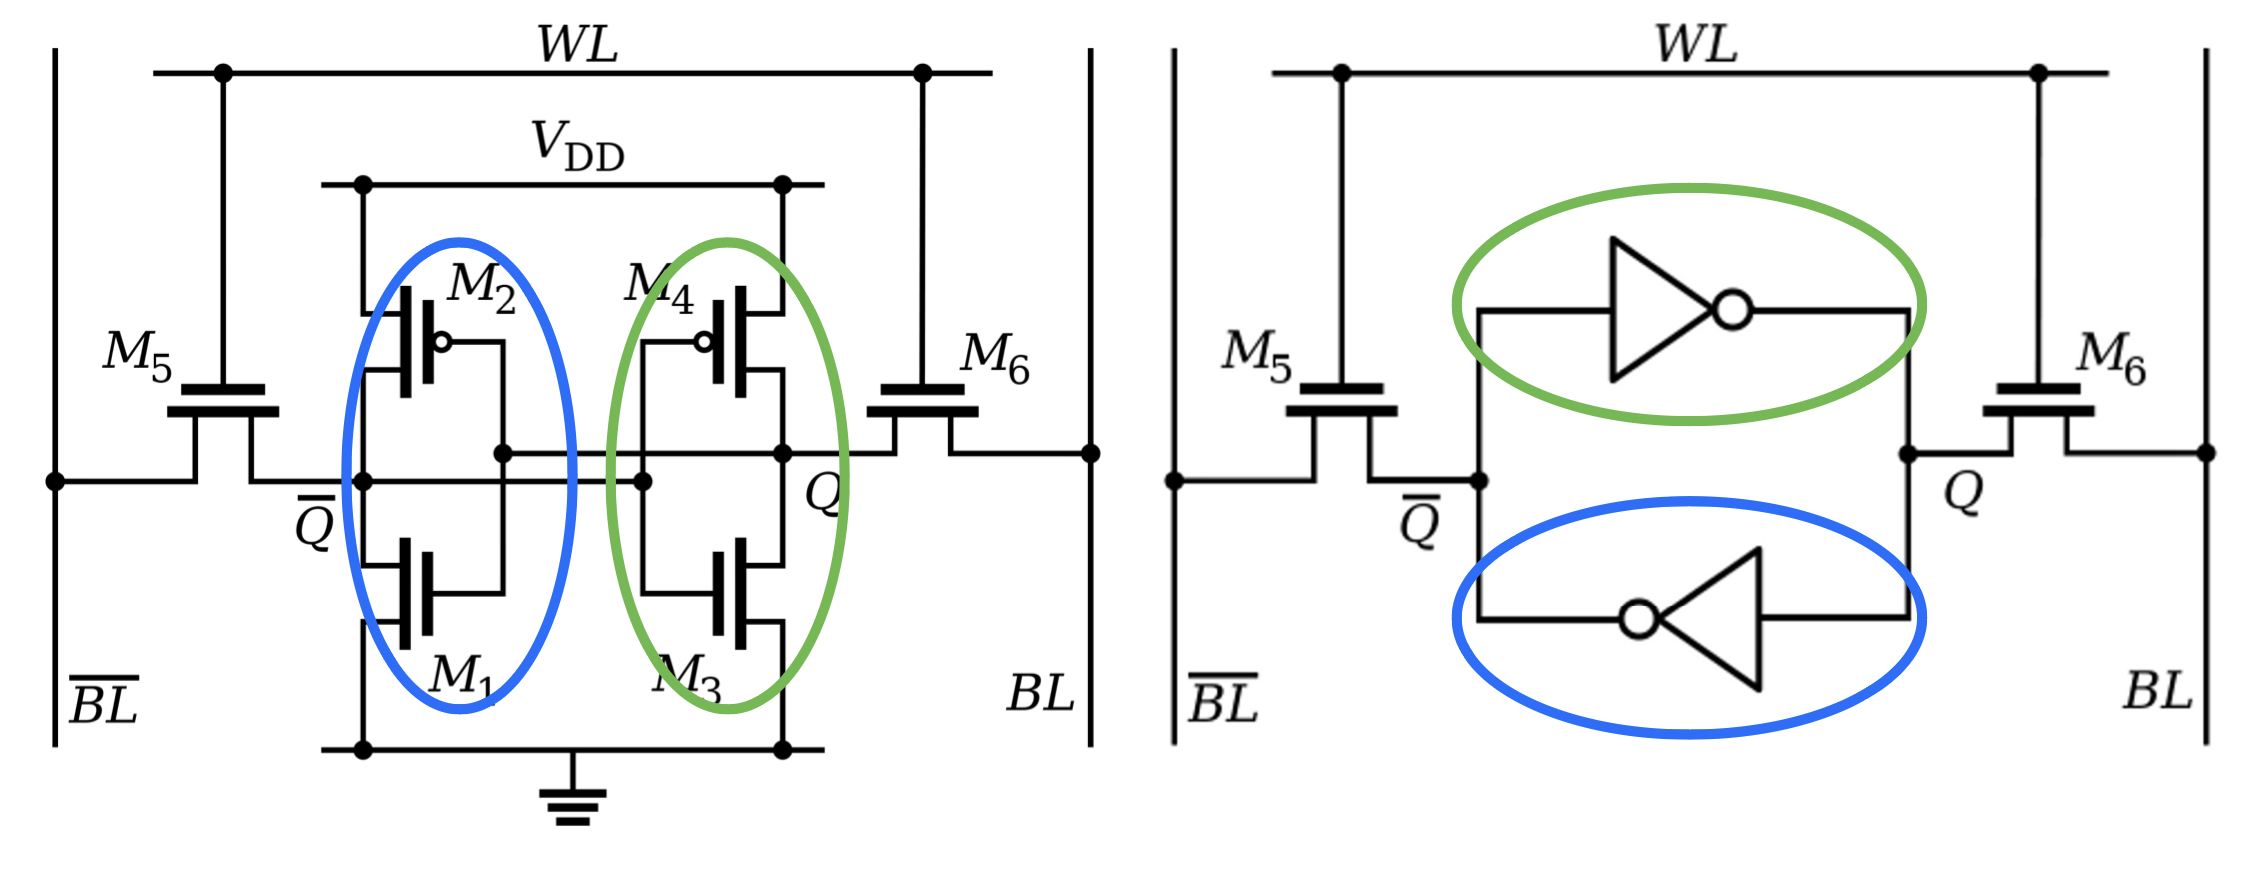 Figure 3: 6T SRAM Cell (Inverters are circled)